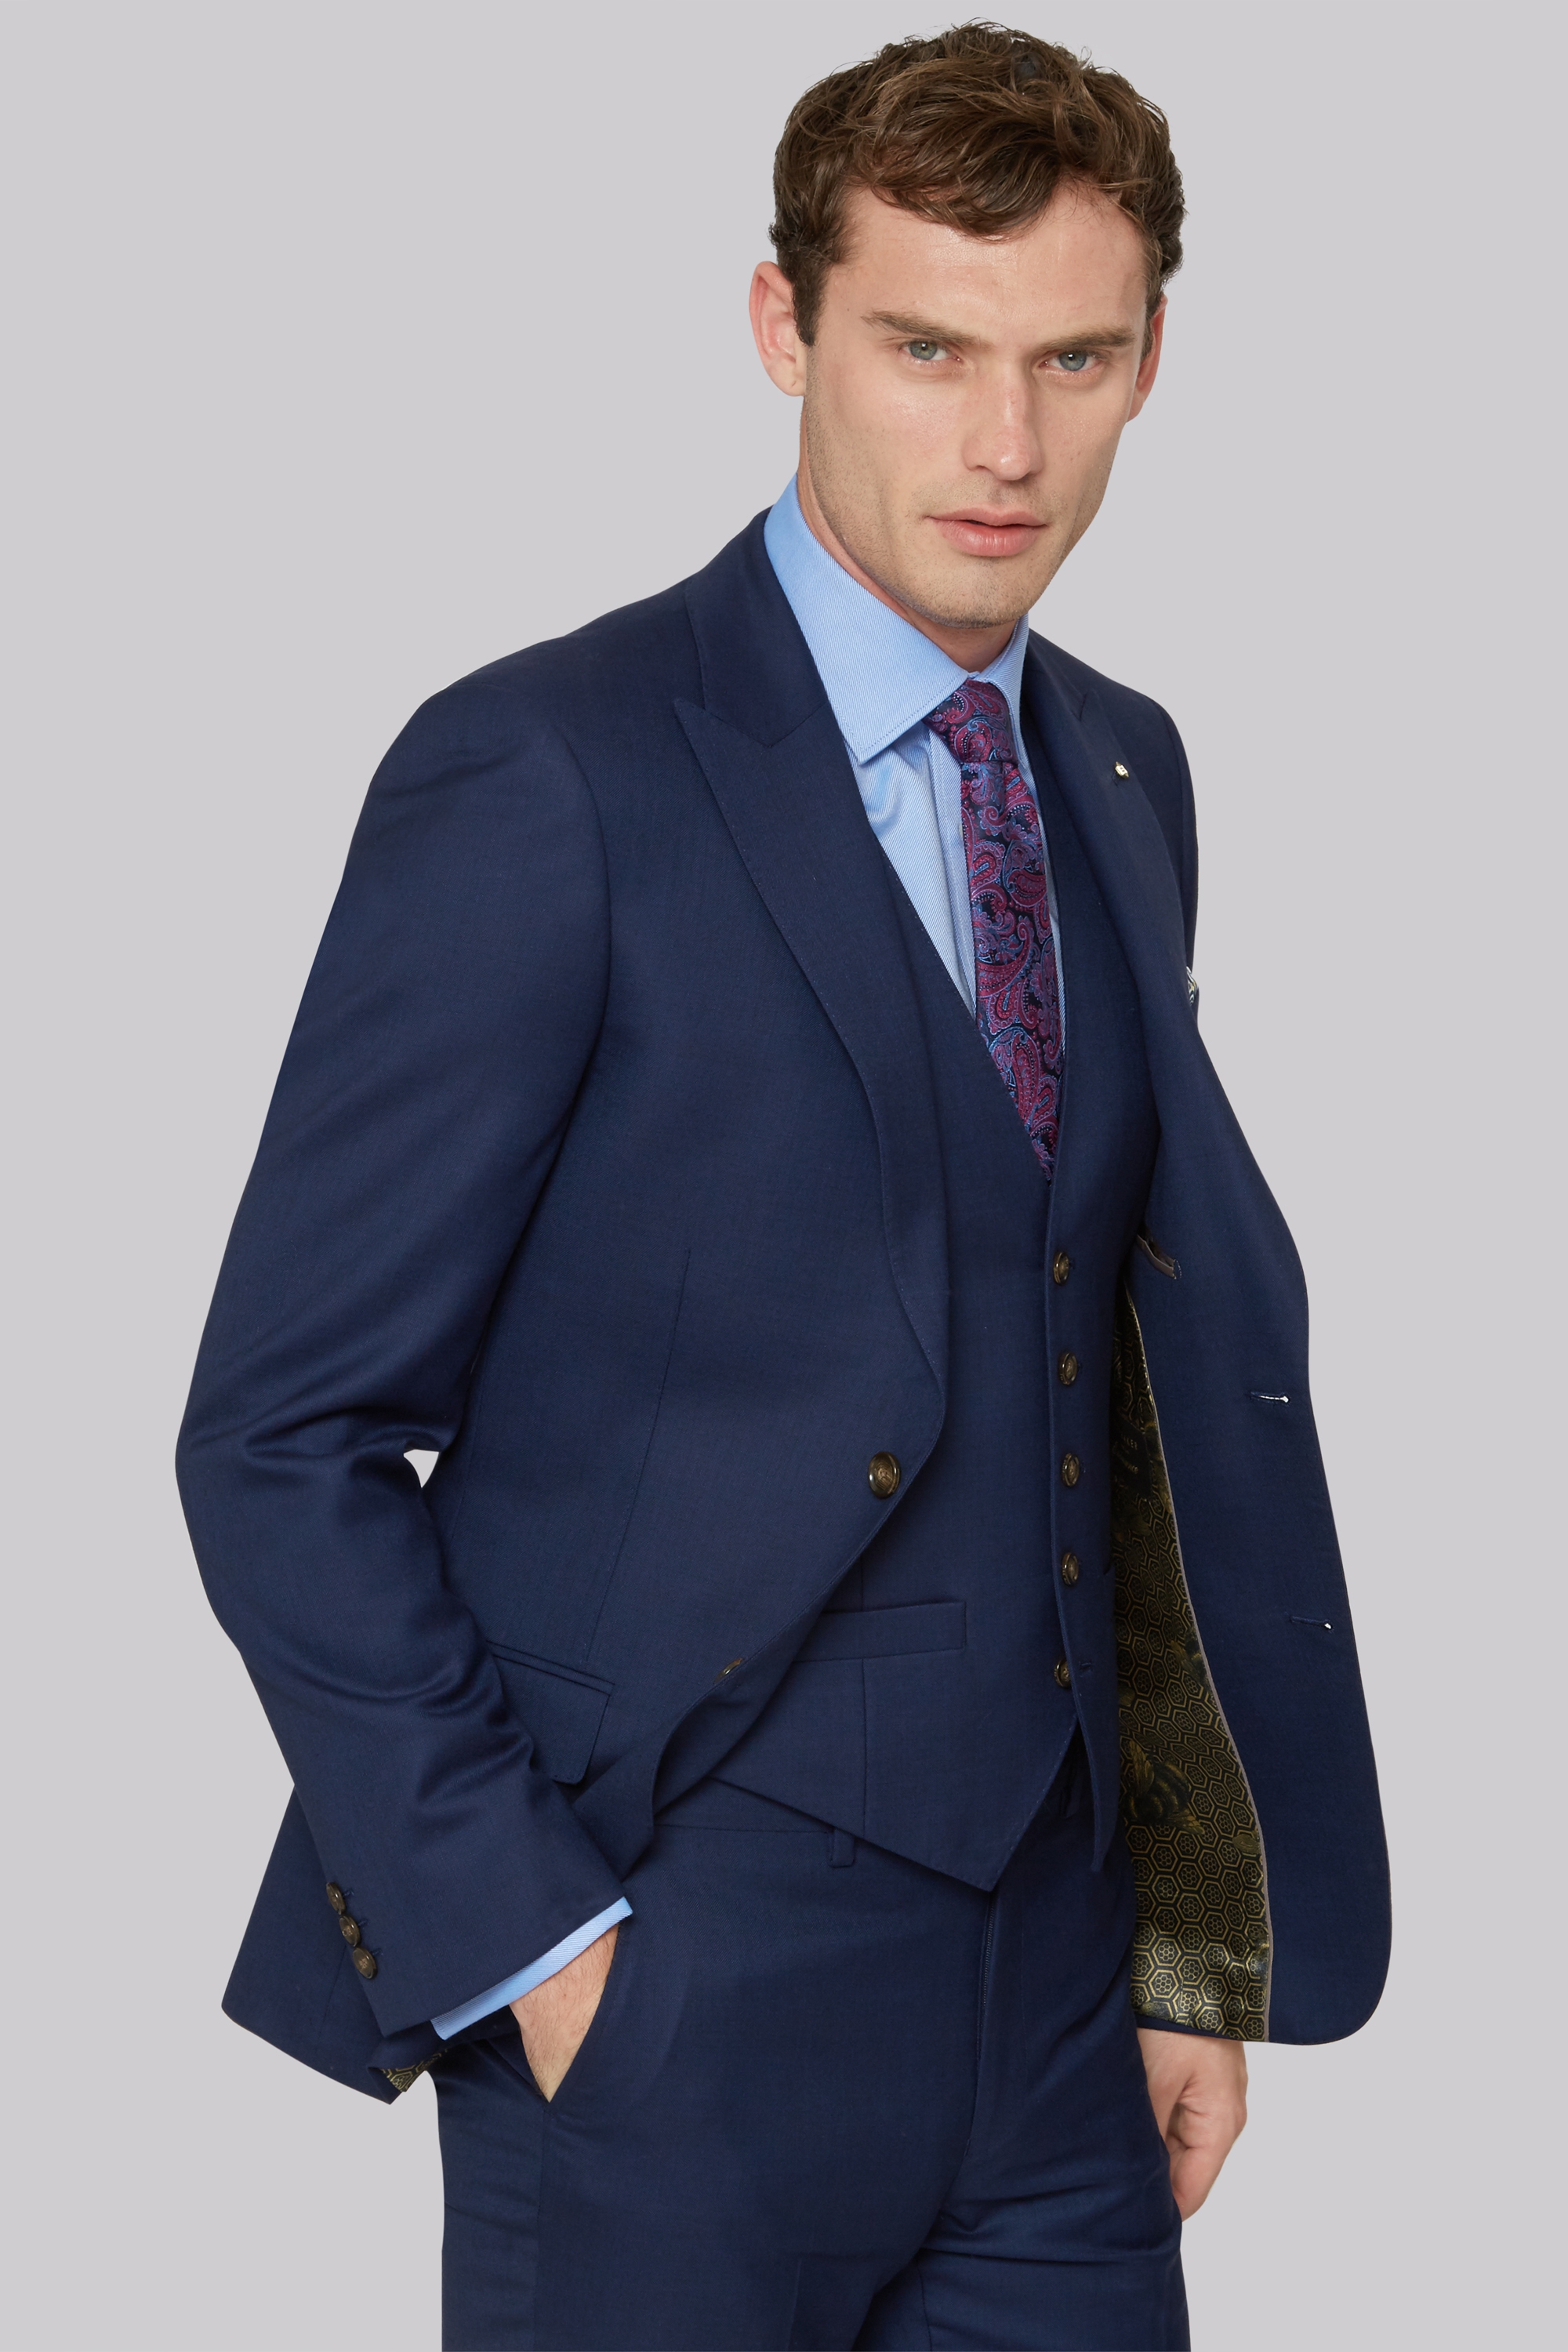 Ted Baker Gold Tailored Fit Navy Two Tone Jacket